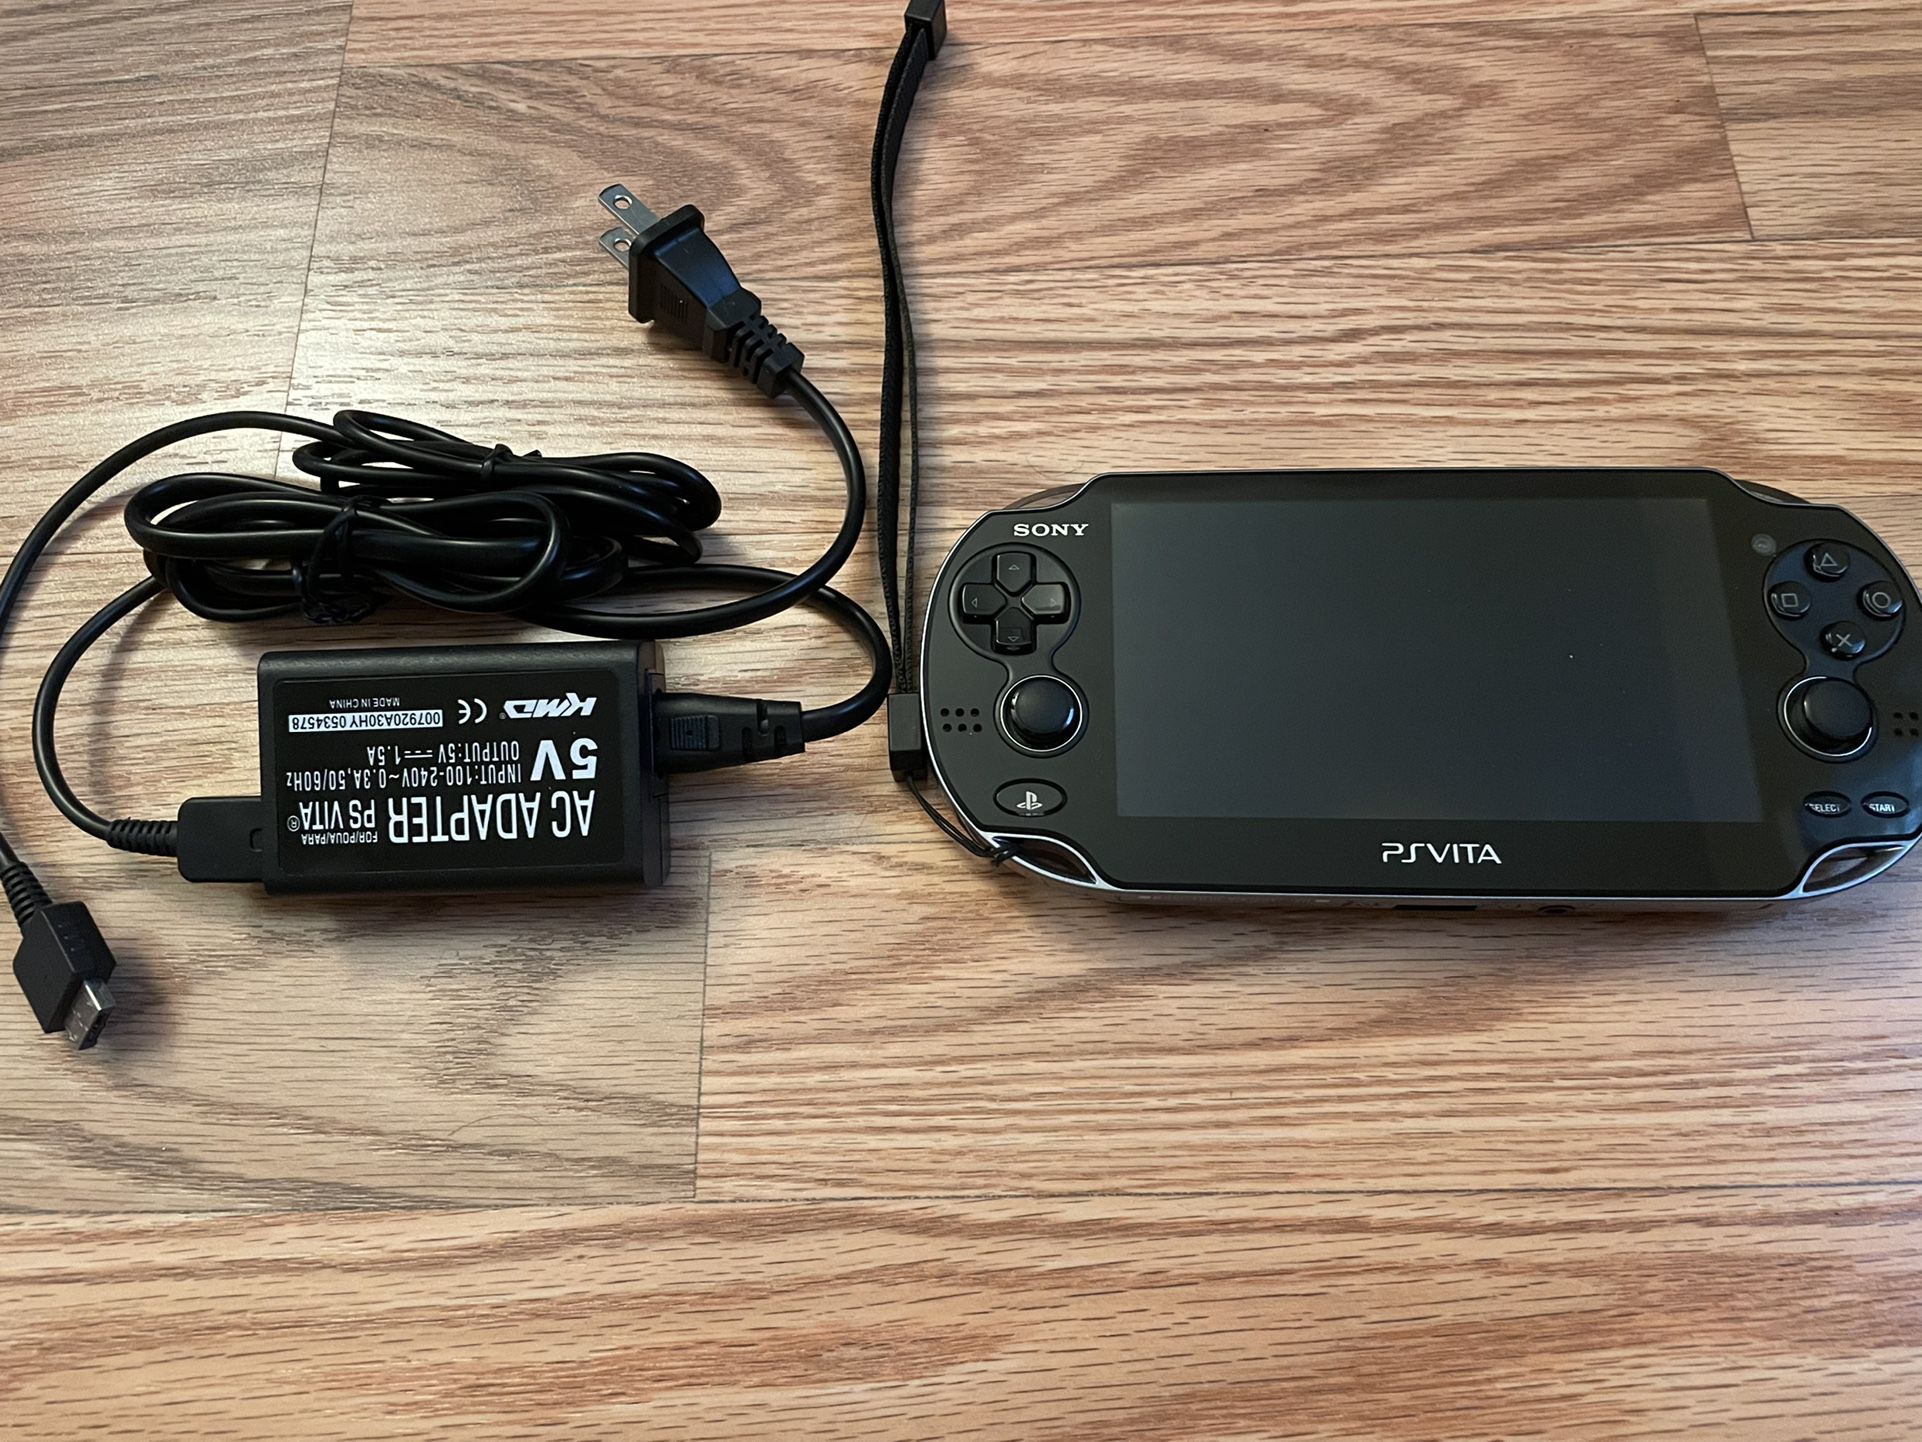 Sony PS Vita Wi-Fi OLED Console PCH-1000 Japan Model for Sale